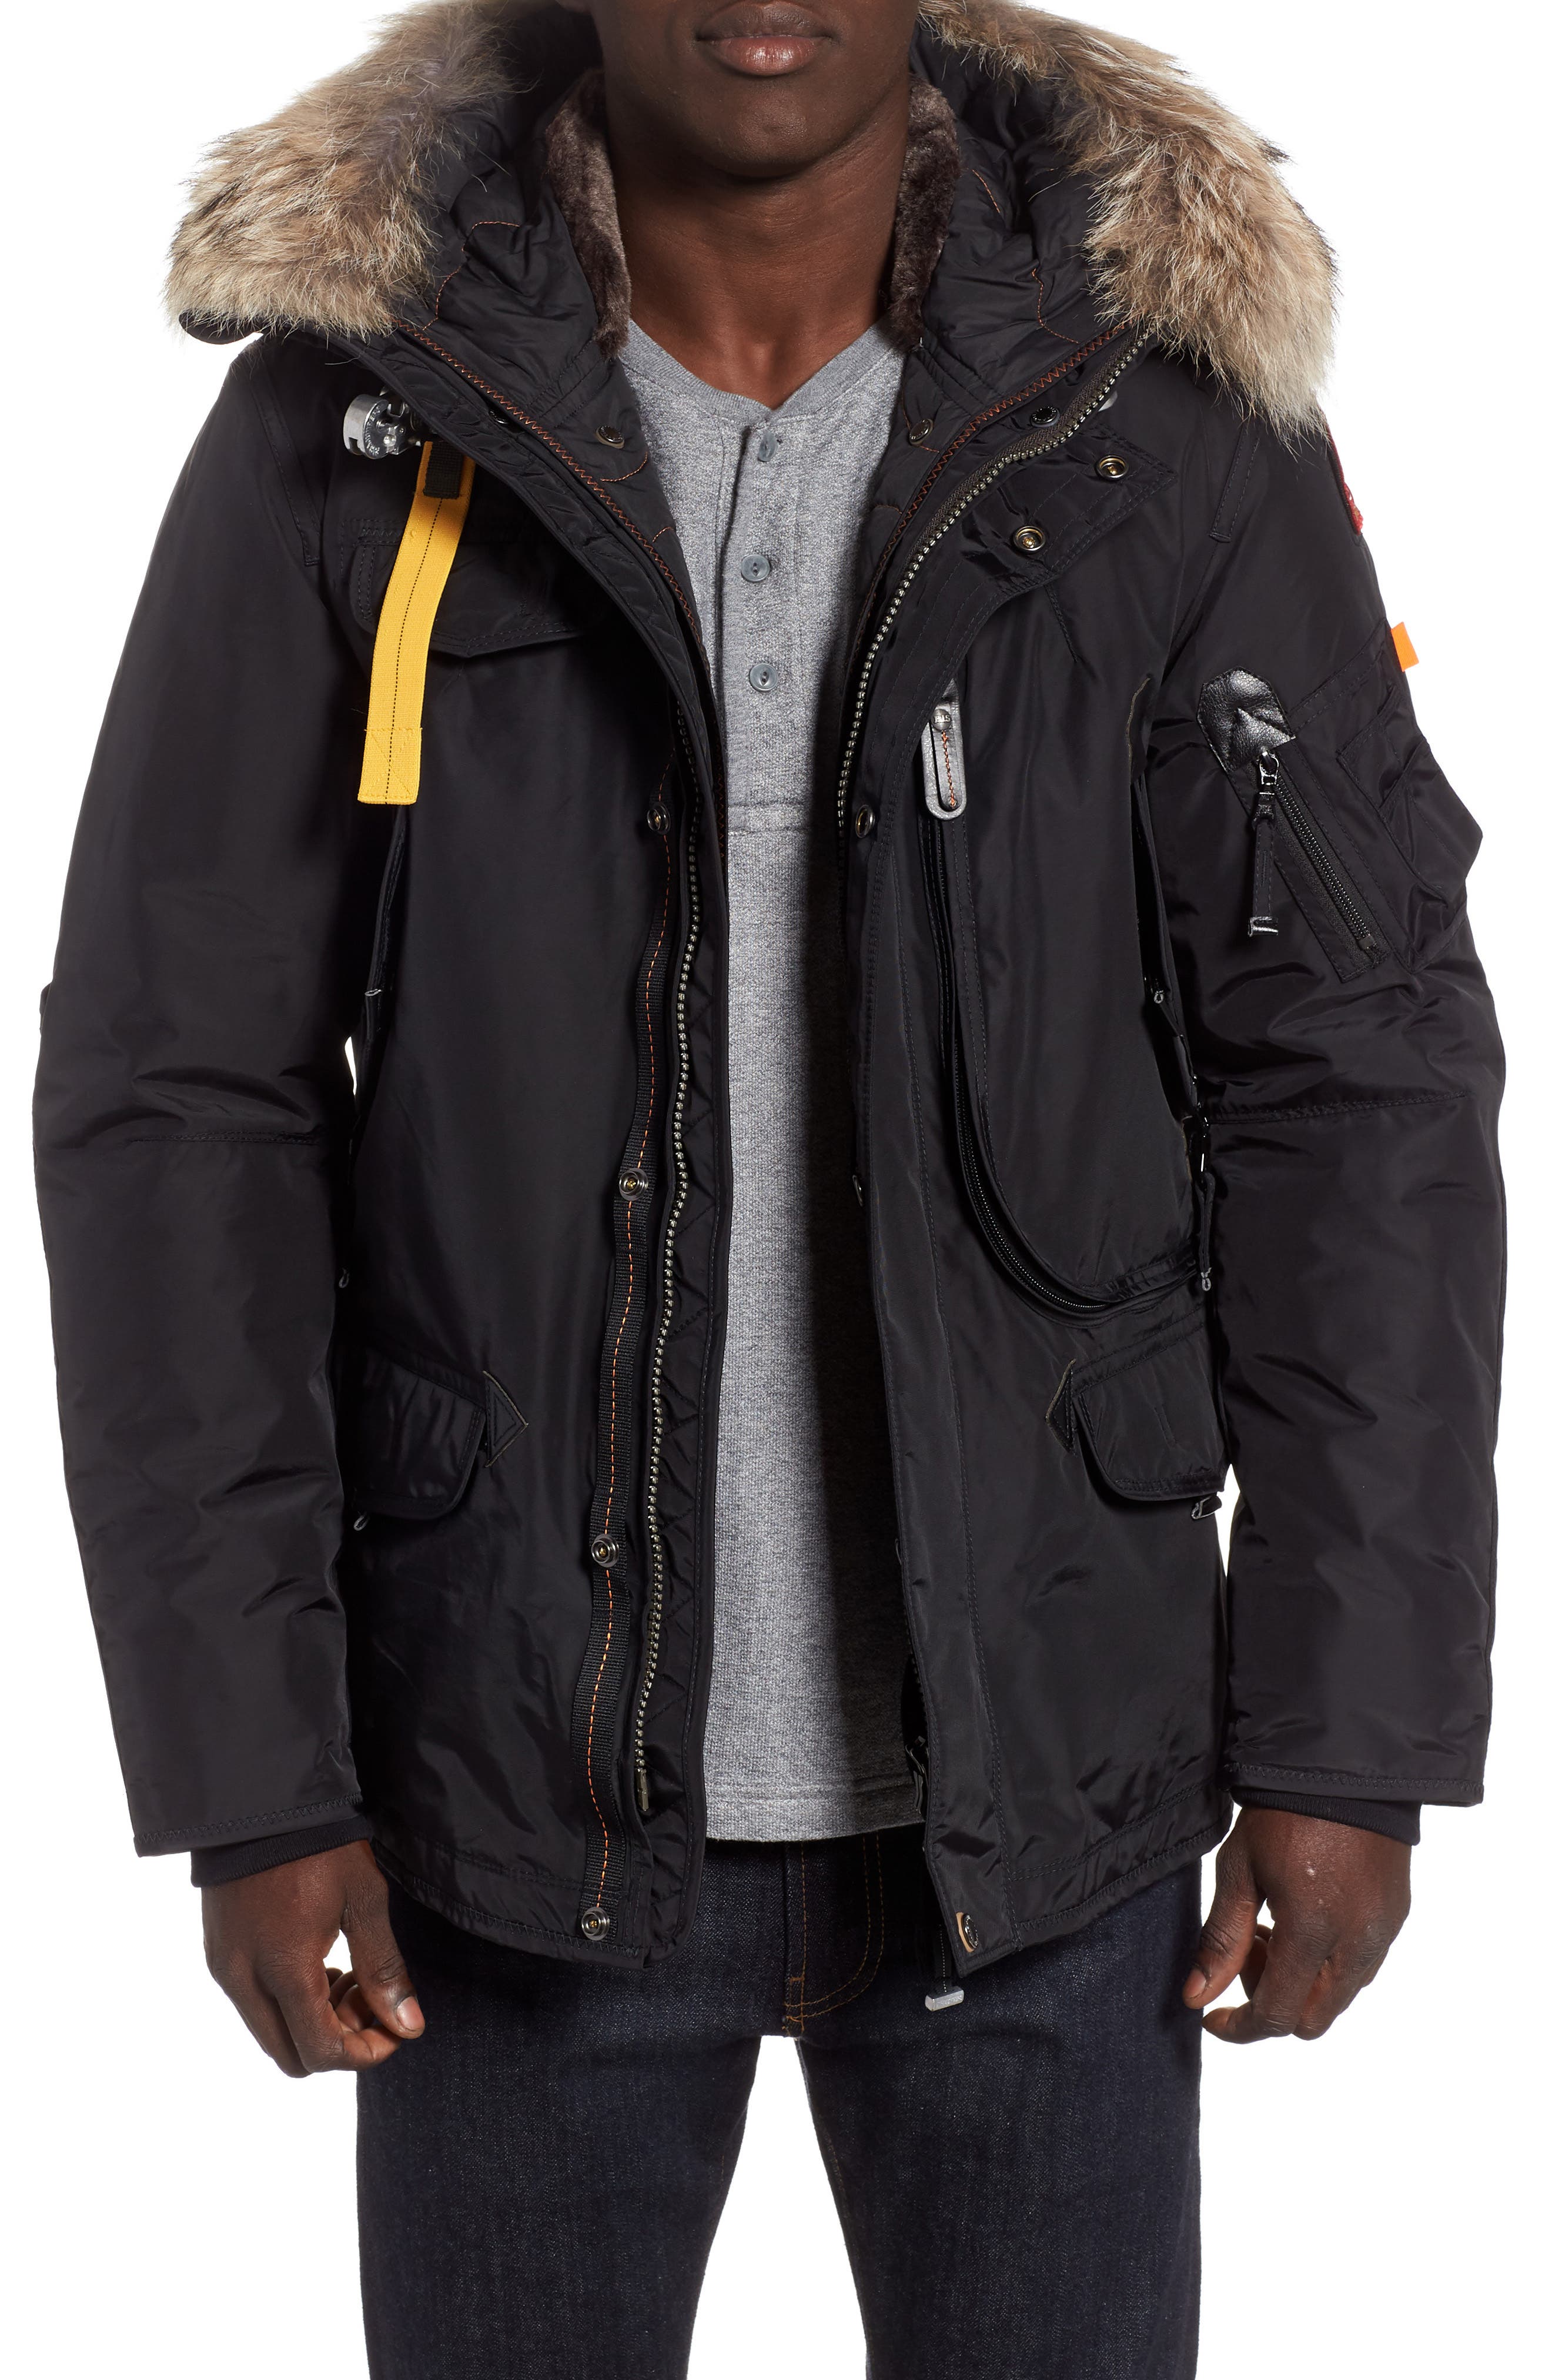 parajumpers right hand jacket